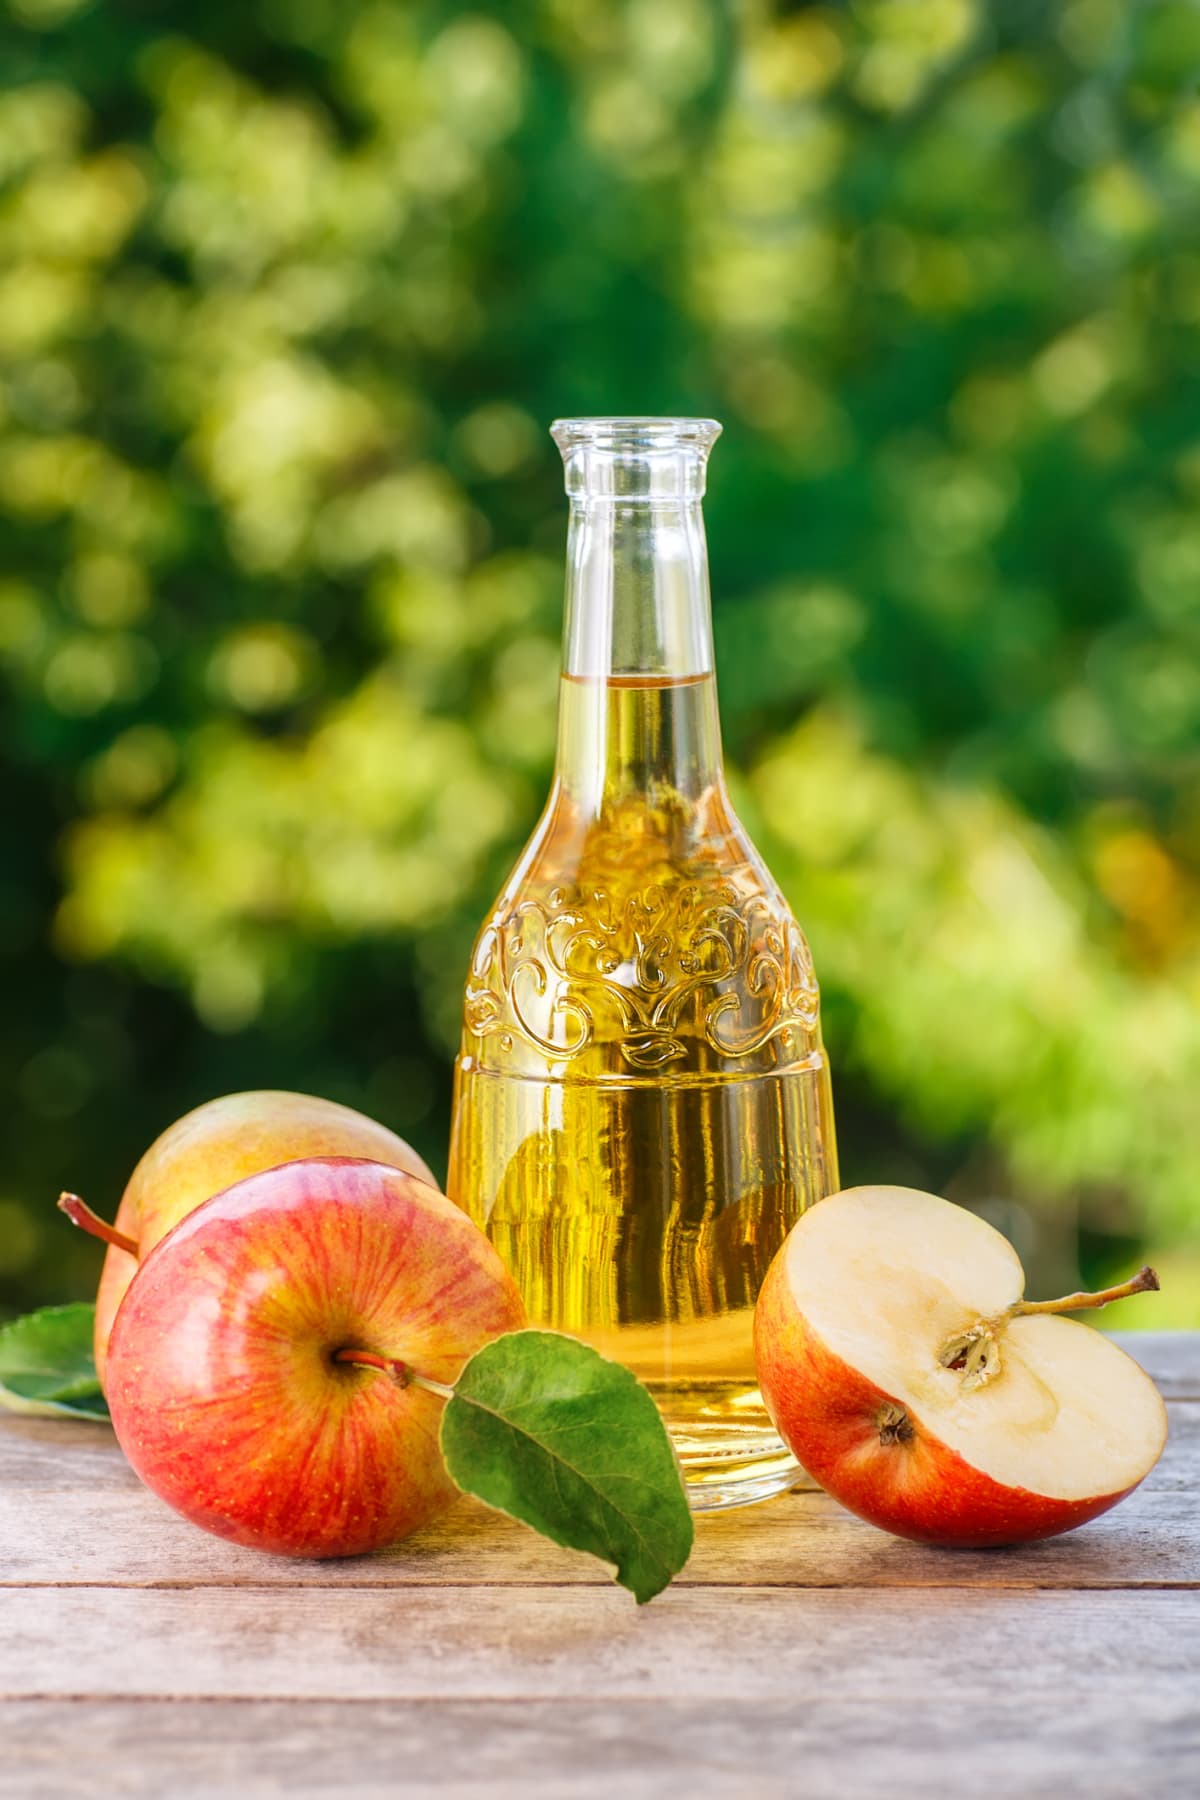 A bottle of apple cider surrounded by red apples